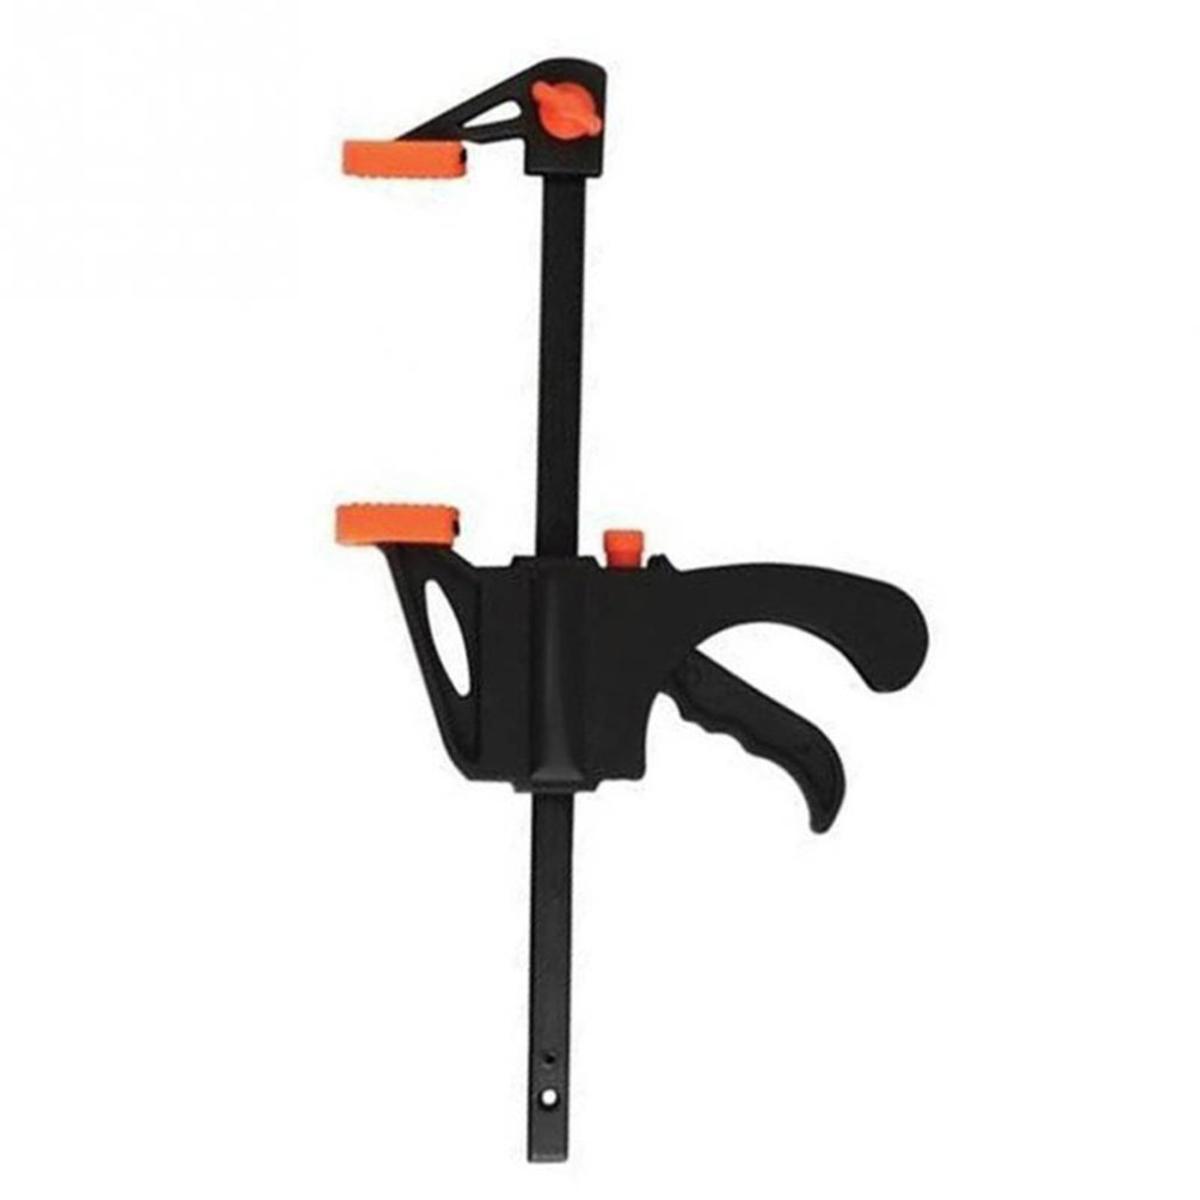 Plastic F Clamp 8 inch Bar F Clamps Clip Grip Quick Ratchet Release Woodworking DIY Hand Tool Kit